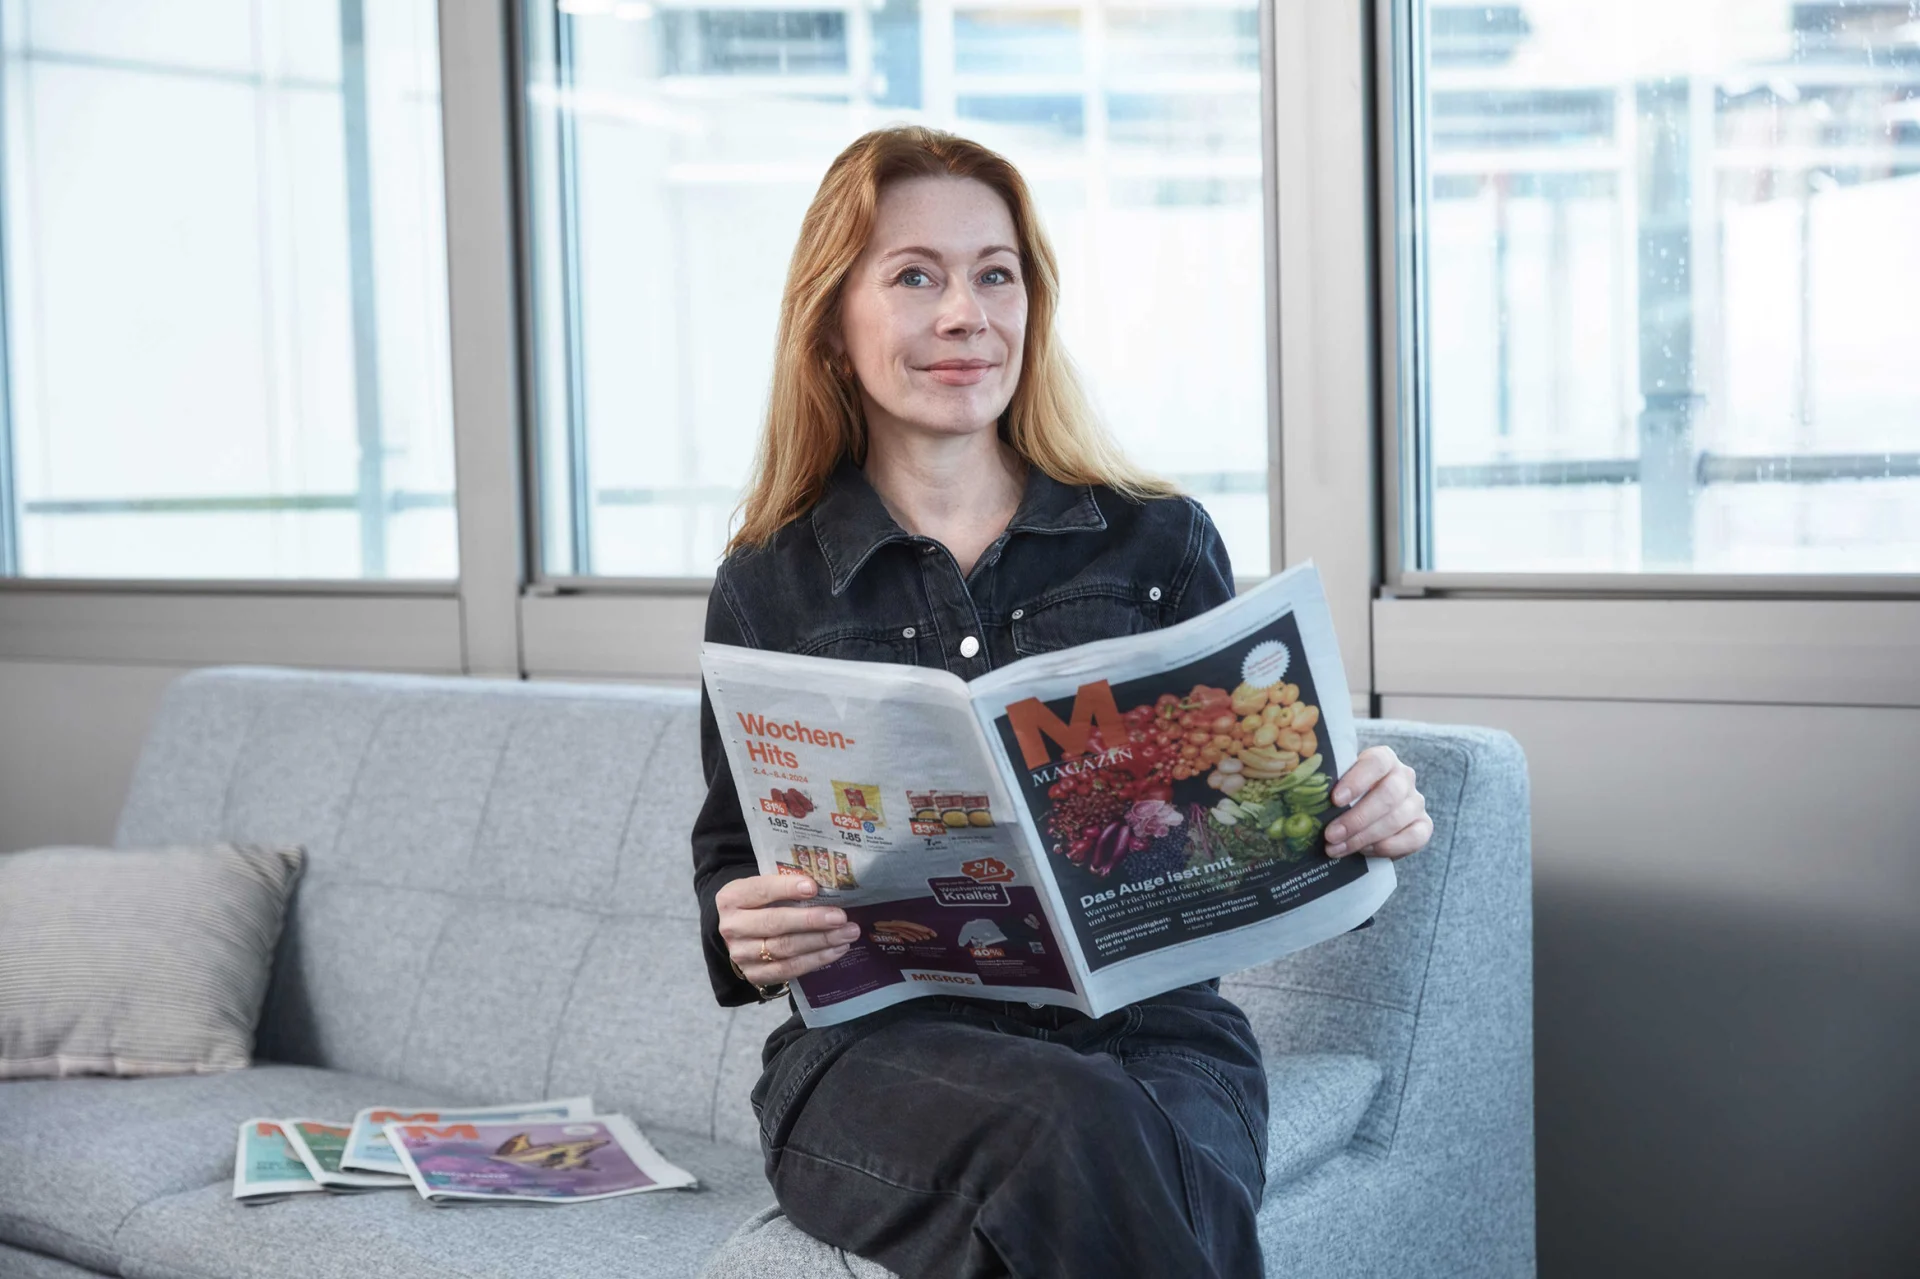 Sabine Wittwer with the Migros magazine in her hand